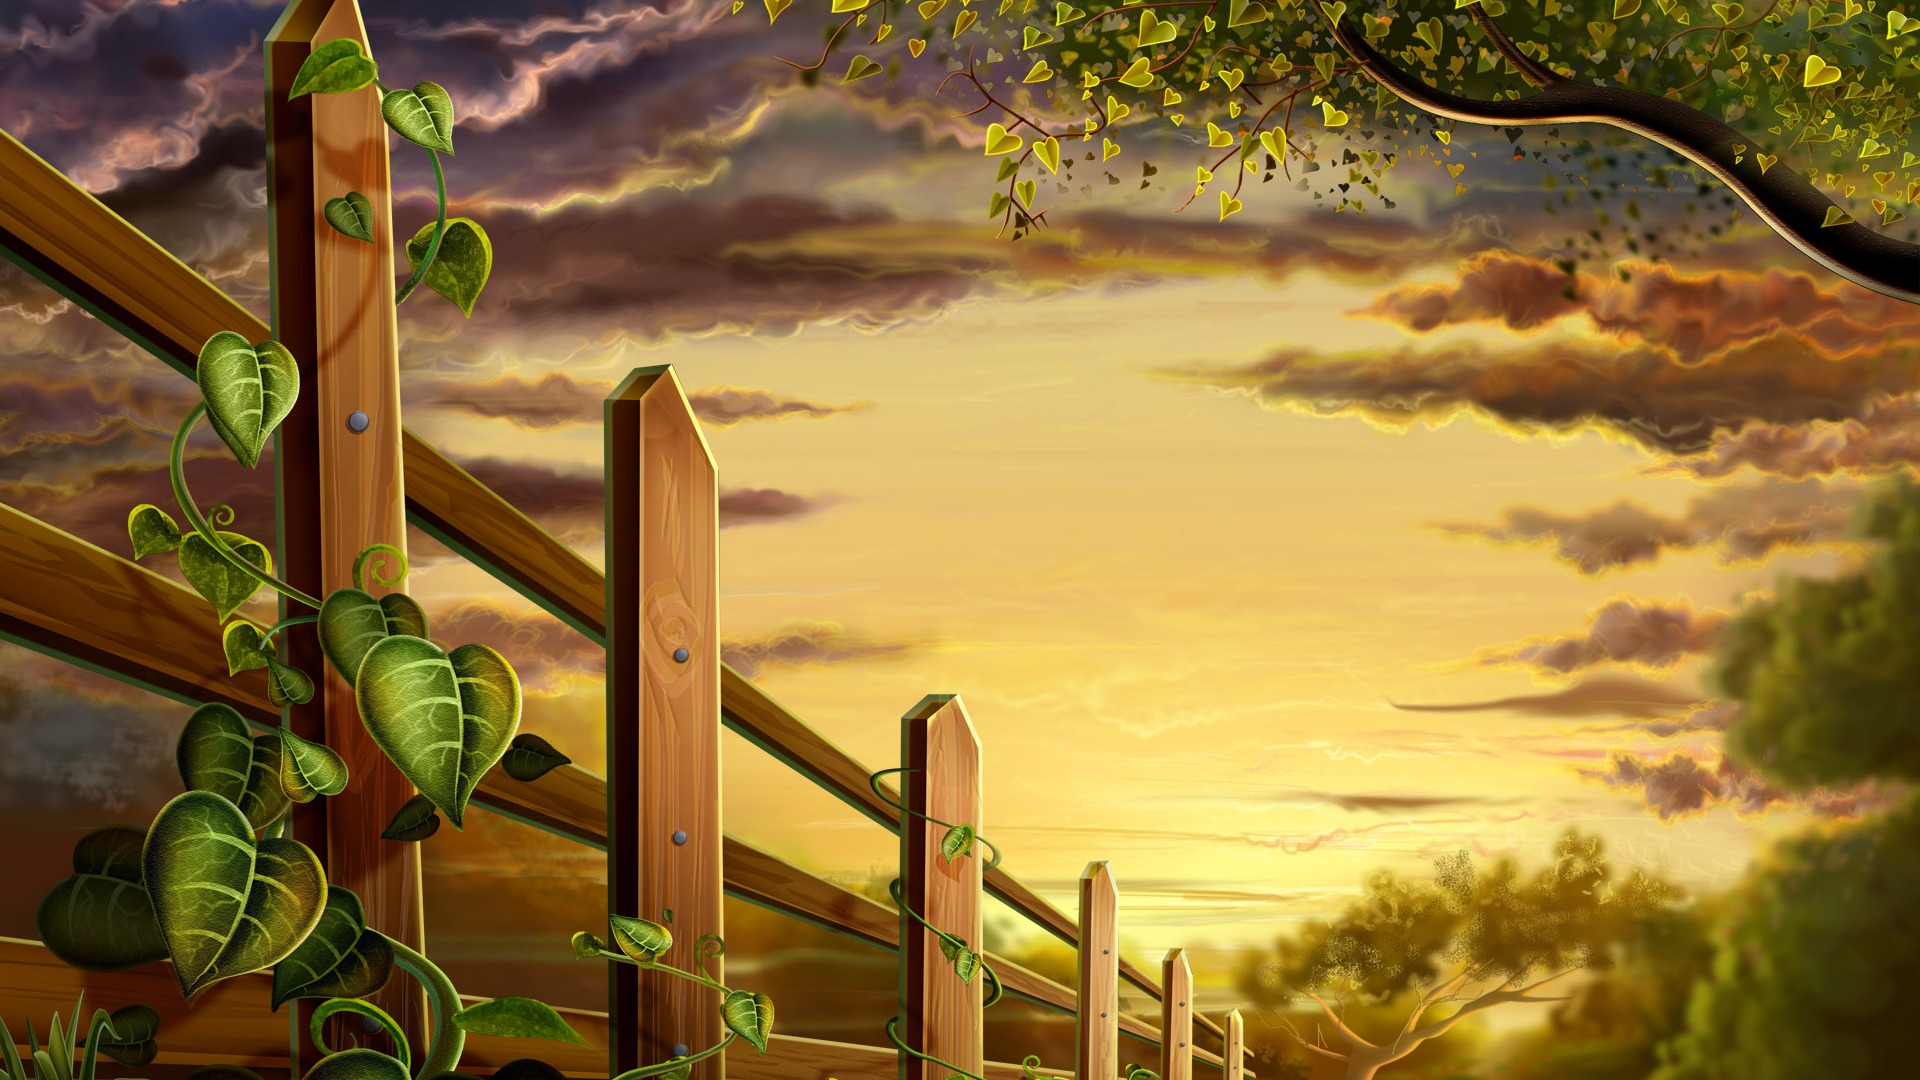 Colorful hand-painted wallpaper landscape ecology (2) #4 - 1920x1080